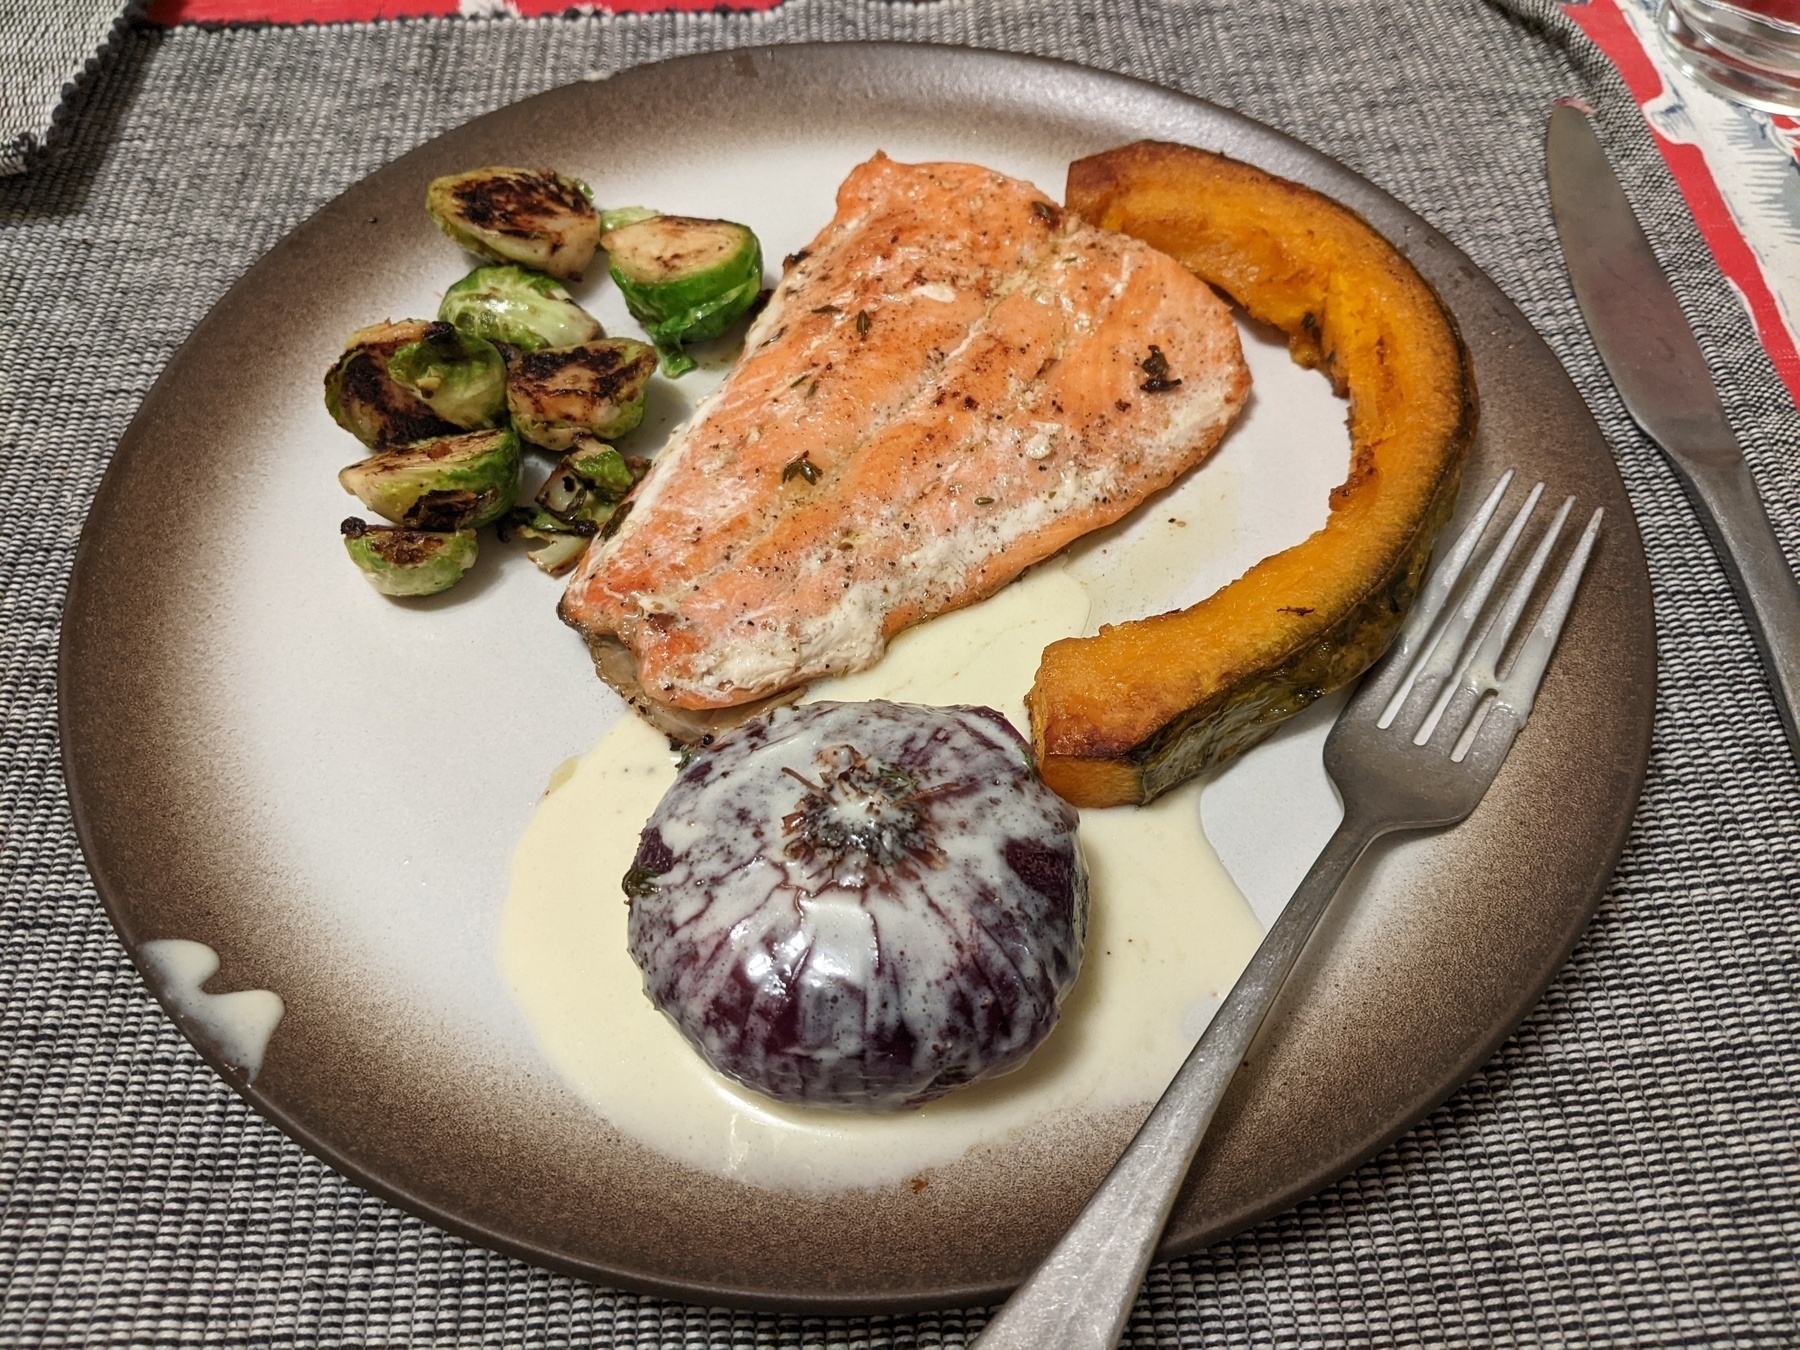 Plate of salmon, roasted squash wedge, whole roasted onion in cream sauce, and Brussels sprouts